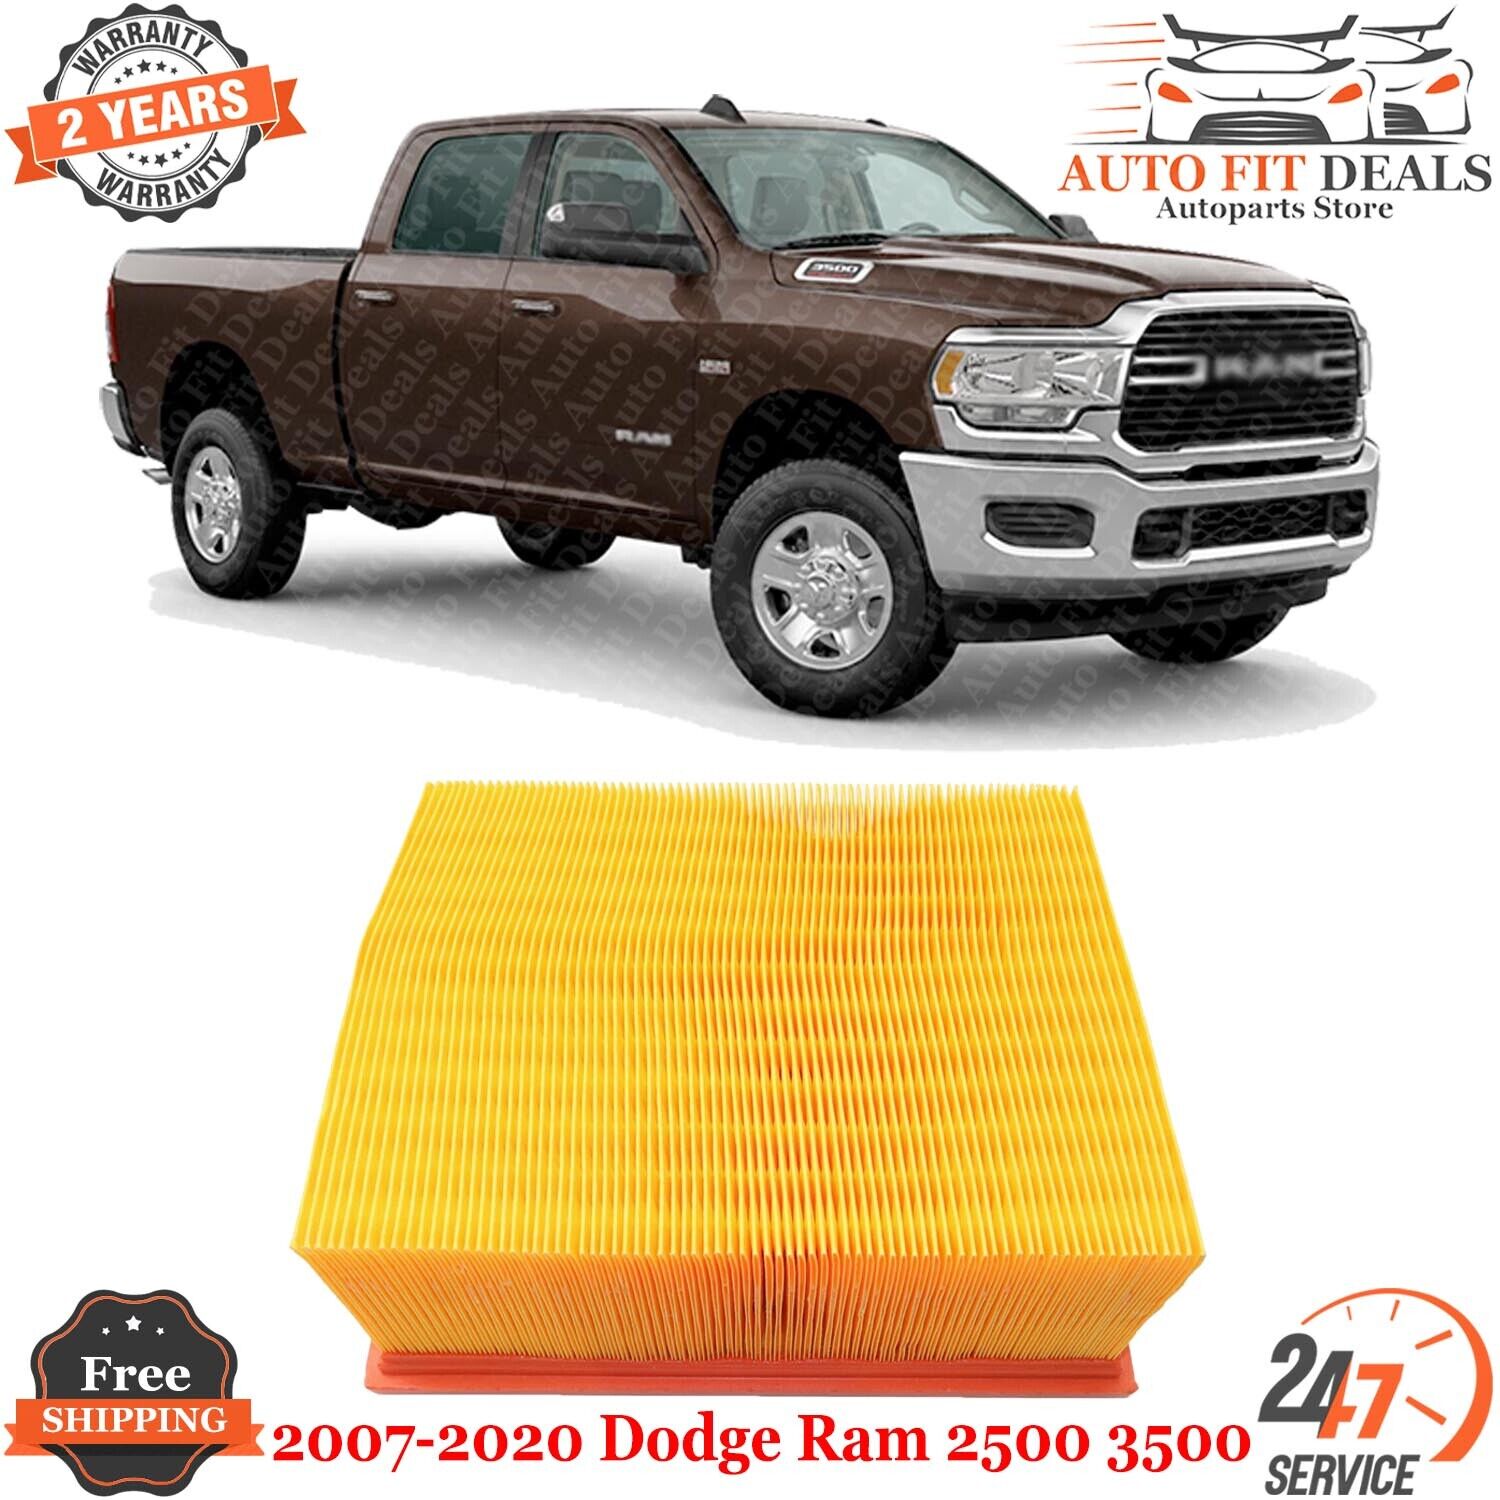 Air Filter For 2007-2017 Dodge Ram Truck 2500 3500 6 Cyl 6.7L Diesel Engine